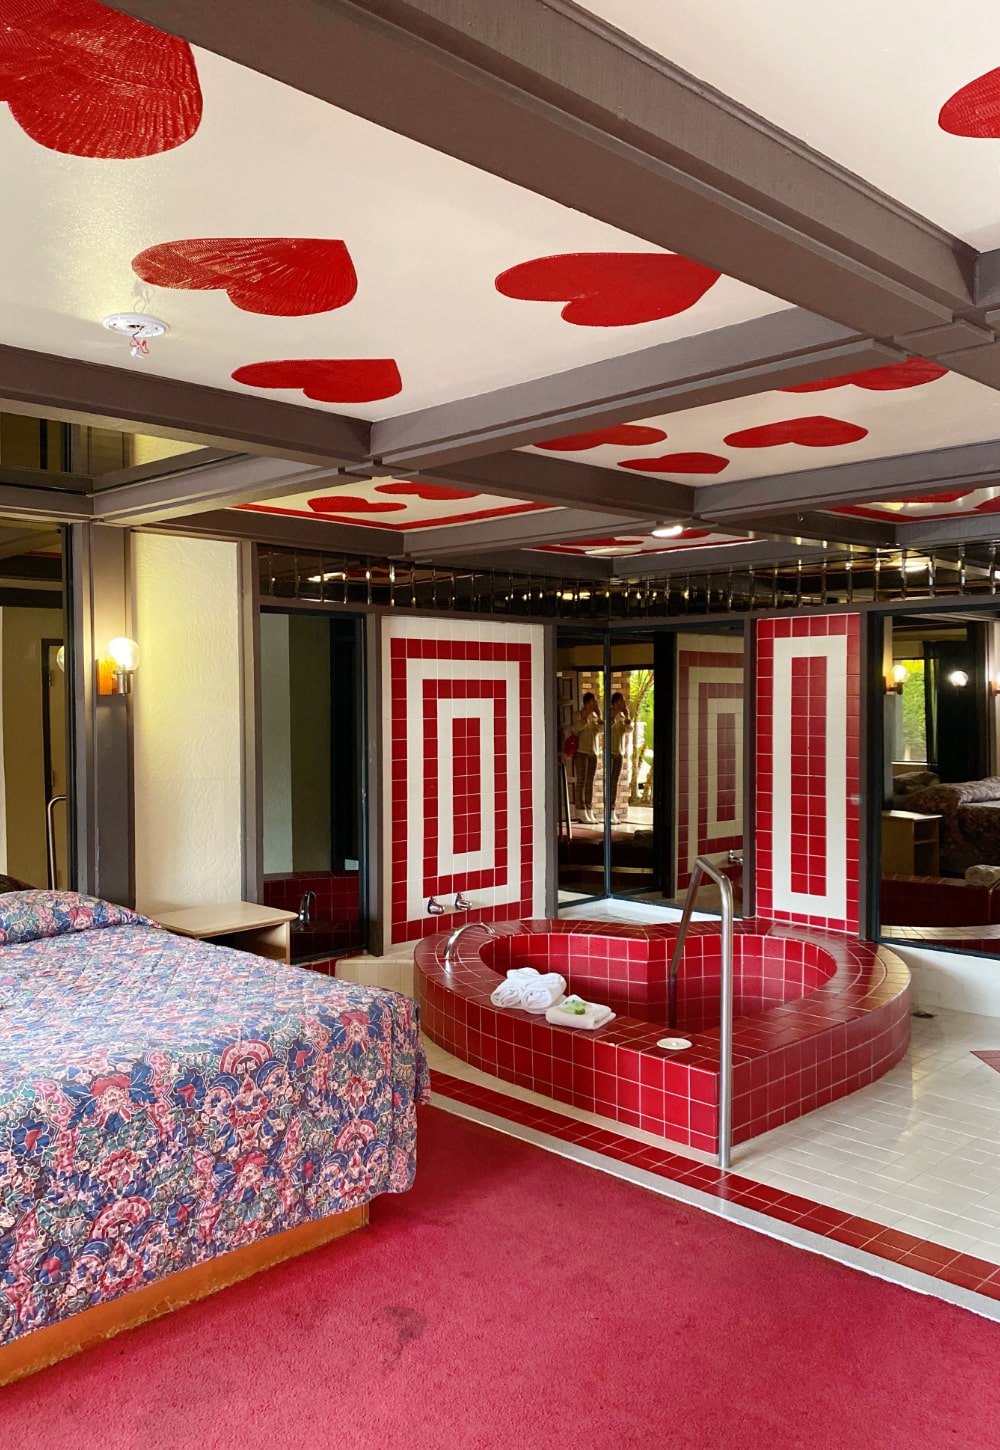 Top 10 weirdest hotels with A Pretty Cool Hotel Tour